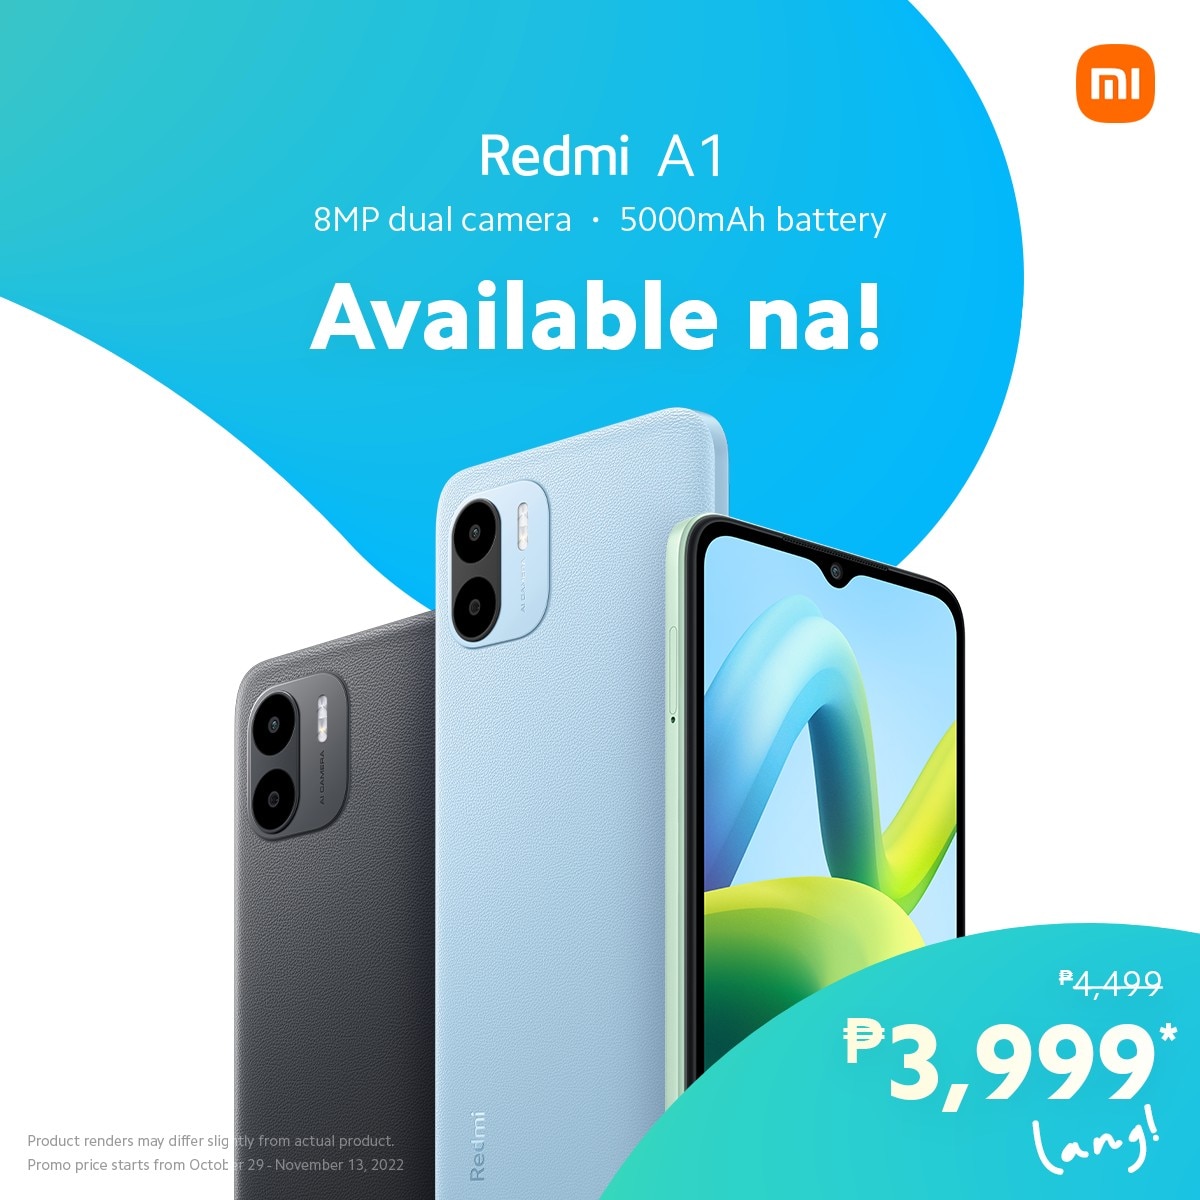 The Redmi A1 aims to disrupt the tech market with its powerful features and budget-friendly price tag. Photo source: Xiaomi